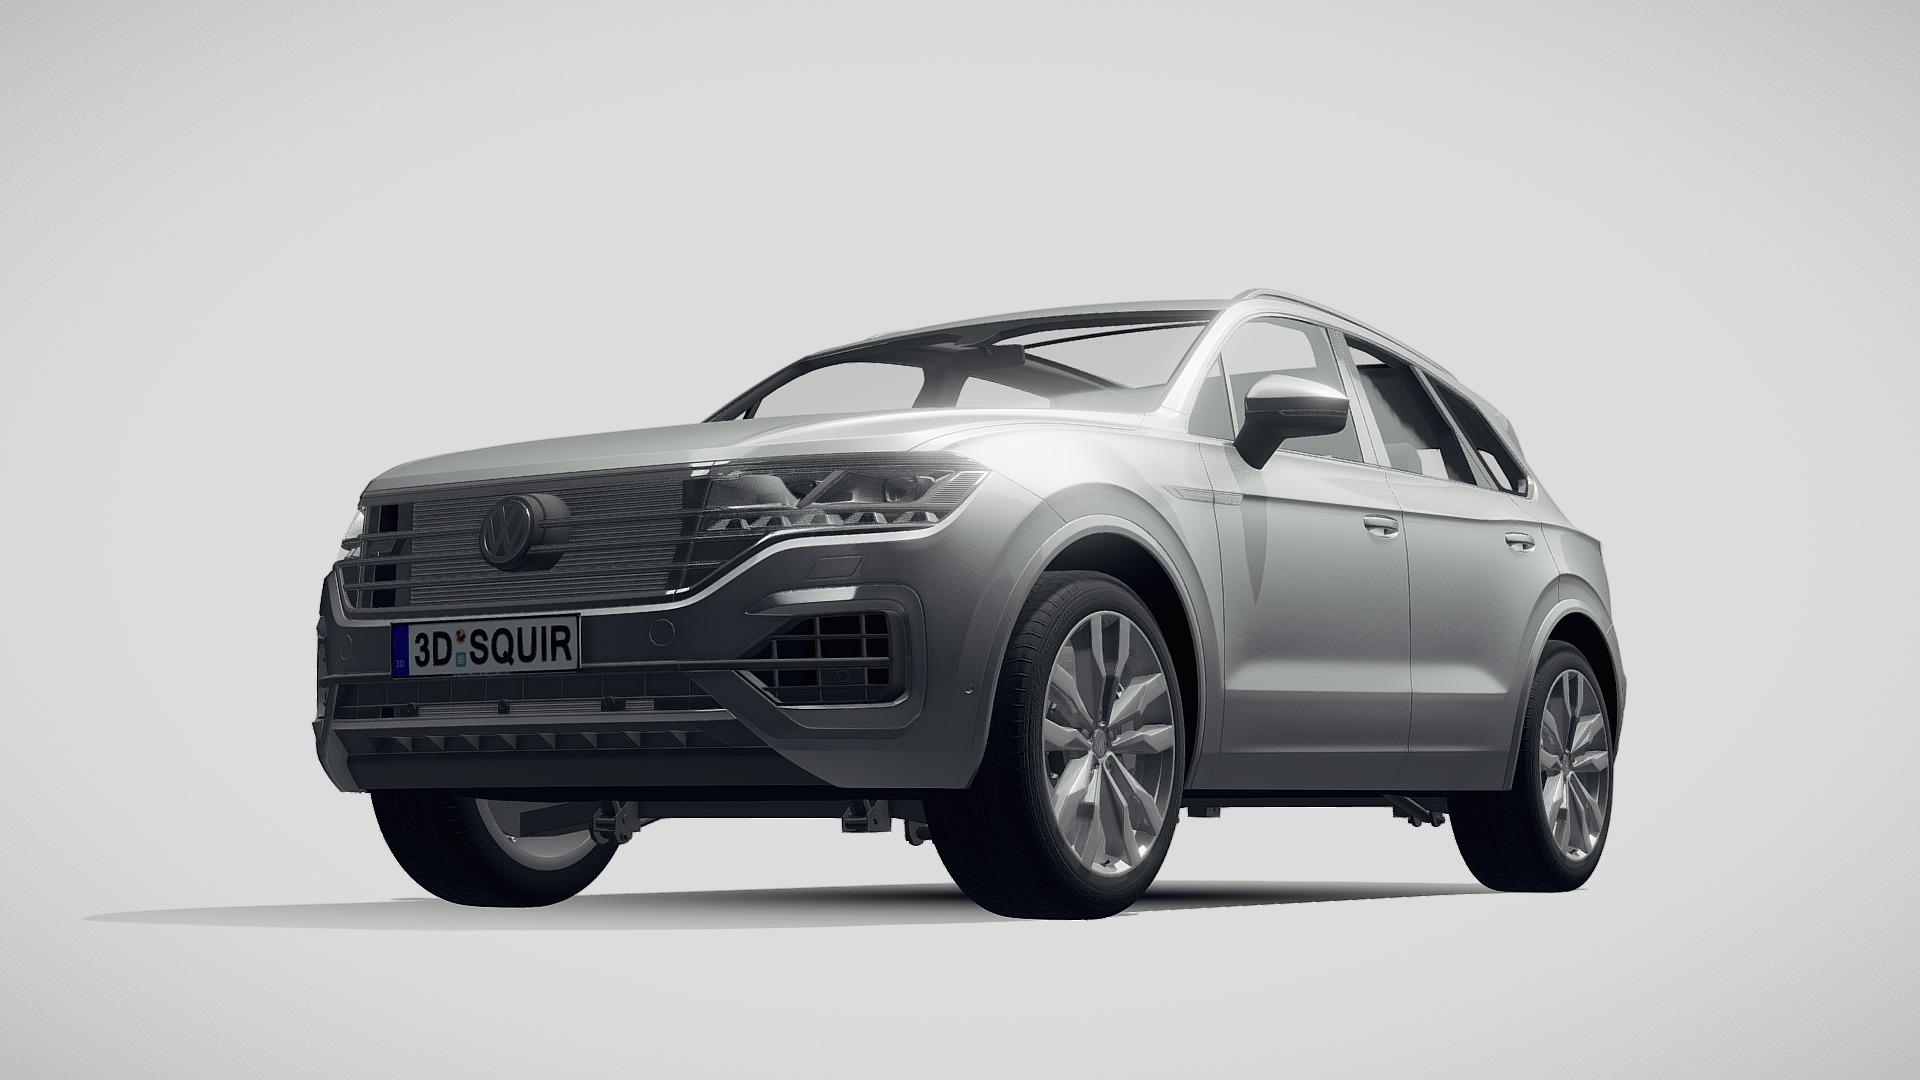 3D model Volkswagen Touareg R-line 2019 - This is a 3D model of the Volkswagen Touareg R-line 2019. The 3D model is about a silver sports car.